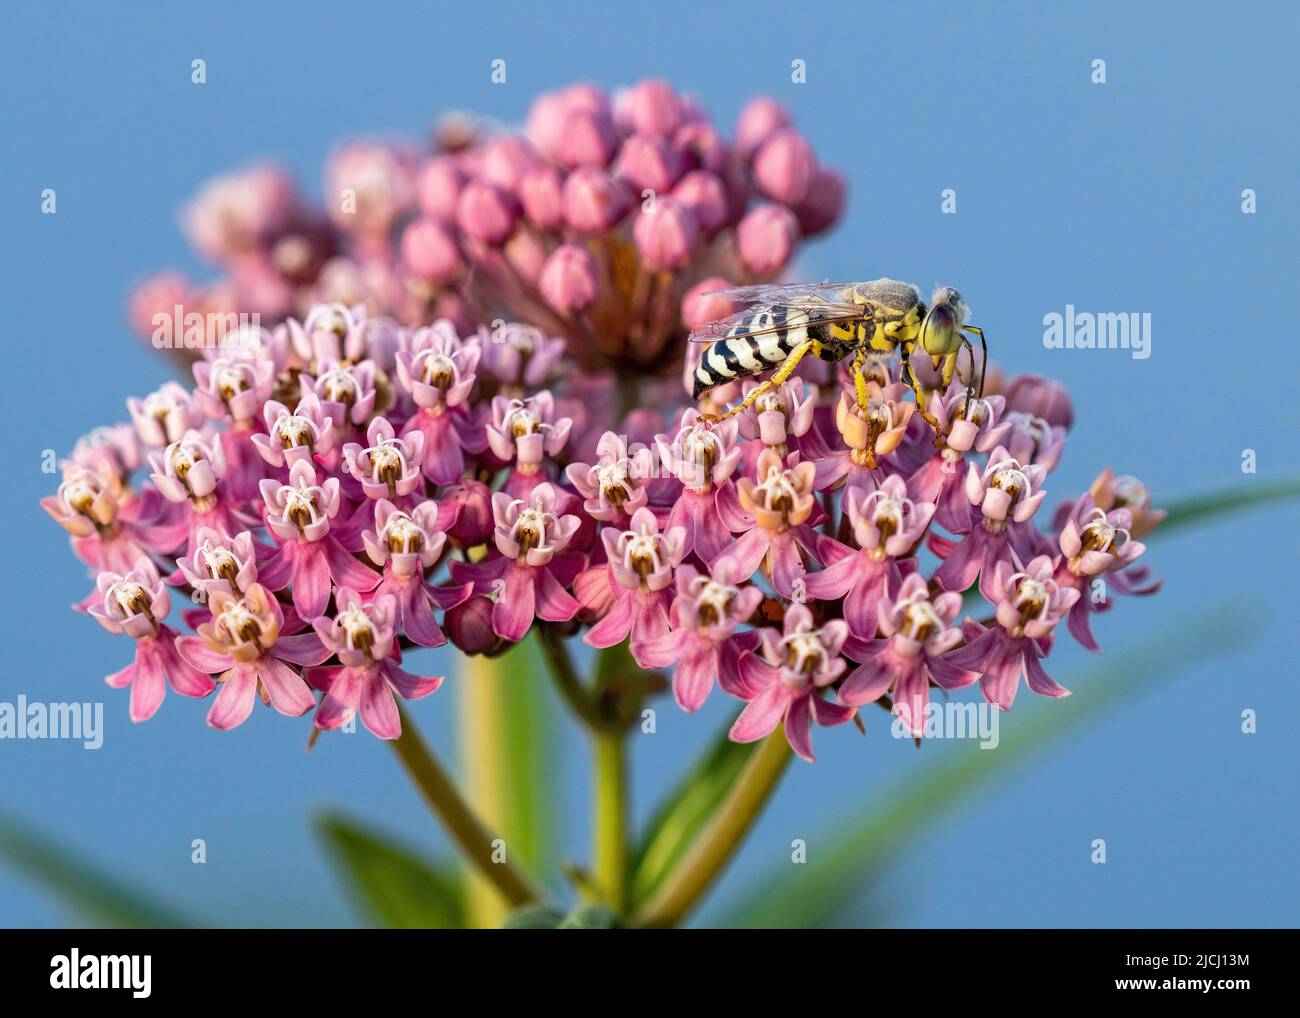 A closeup side profile of a Sand Wasp atop a freshly blooming Swamp Milkweed flower against a natural blue background. Stock Photo